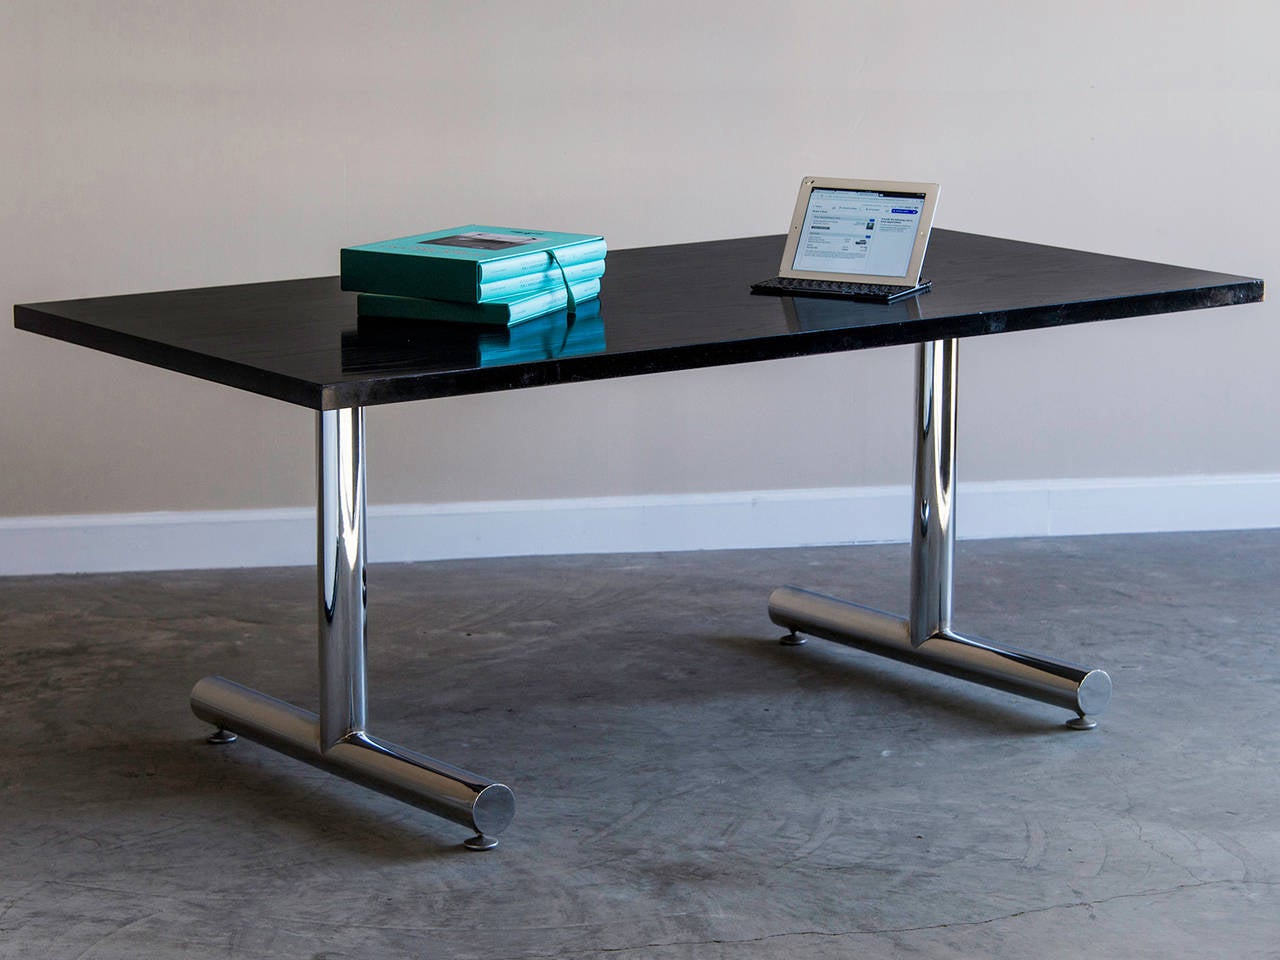 Receive our new selections direct from 1stdibs by email each week. Please click Follow Dealer below and see them first!

Vintage American Milo Baughman chrome, ebonized oak table circa 1970. The simple rectangular top stands upon the iconic rolled